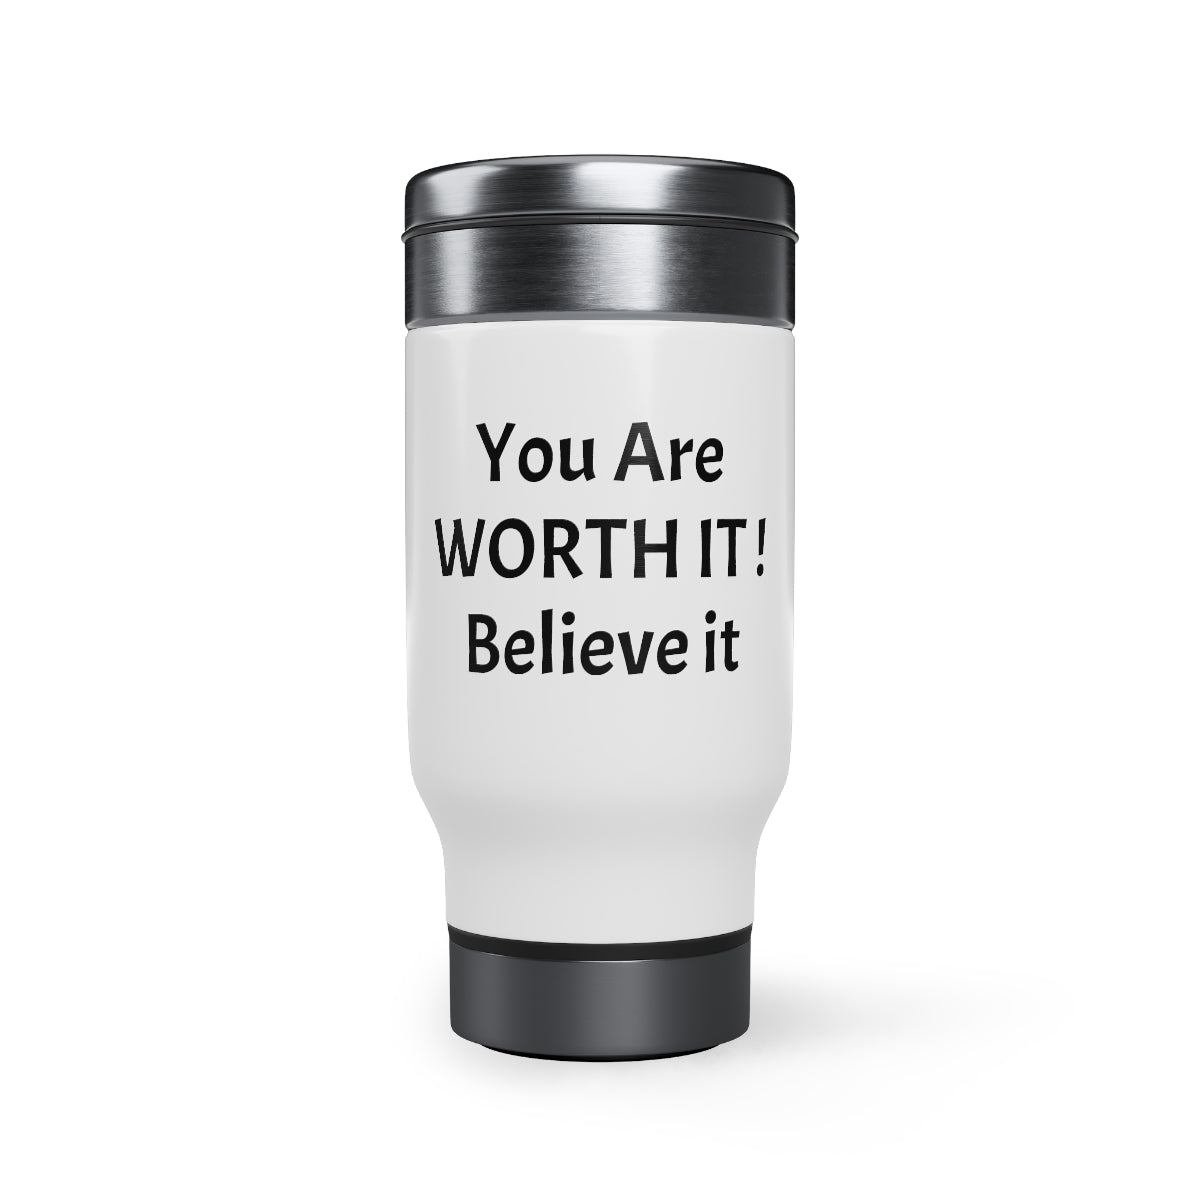 You Are Worth it! Stainless Steel Travel Mug with Handle, 14oz